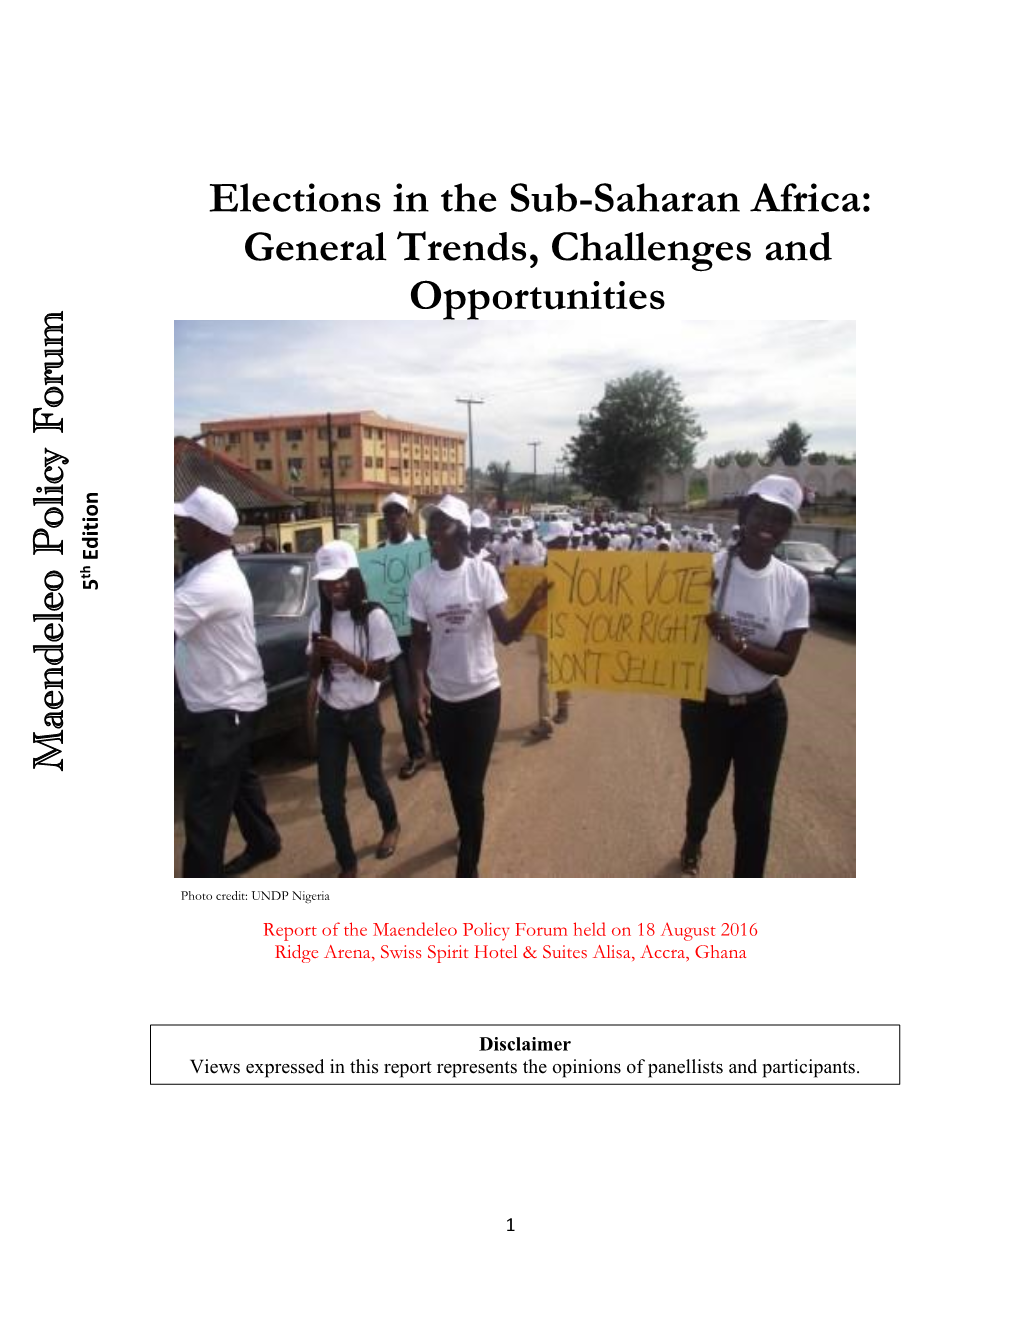 Elections in the Sub-Saharan Africa: General Trends, Challenges and Opportunities Maendeleo Policy F Orum